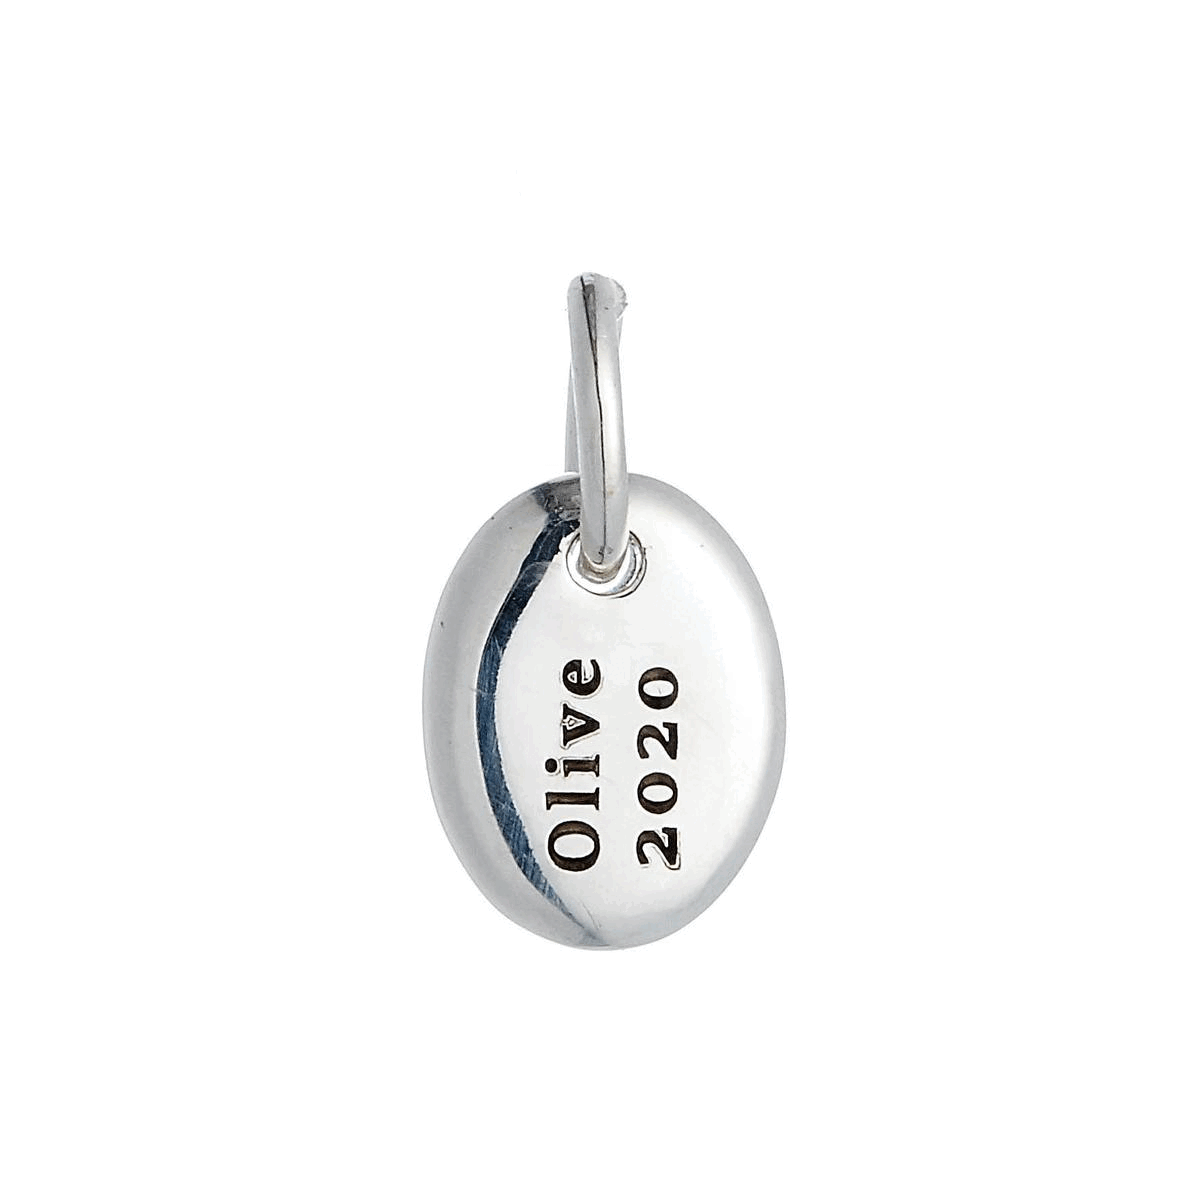 Pebble Personalised Initial Silver Charm FREE UK DELIVERY